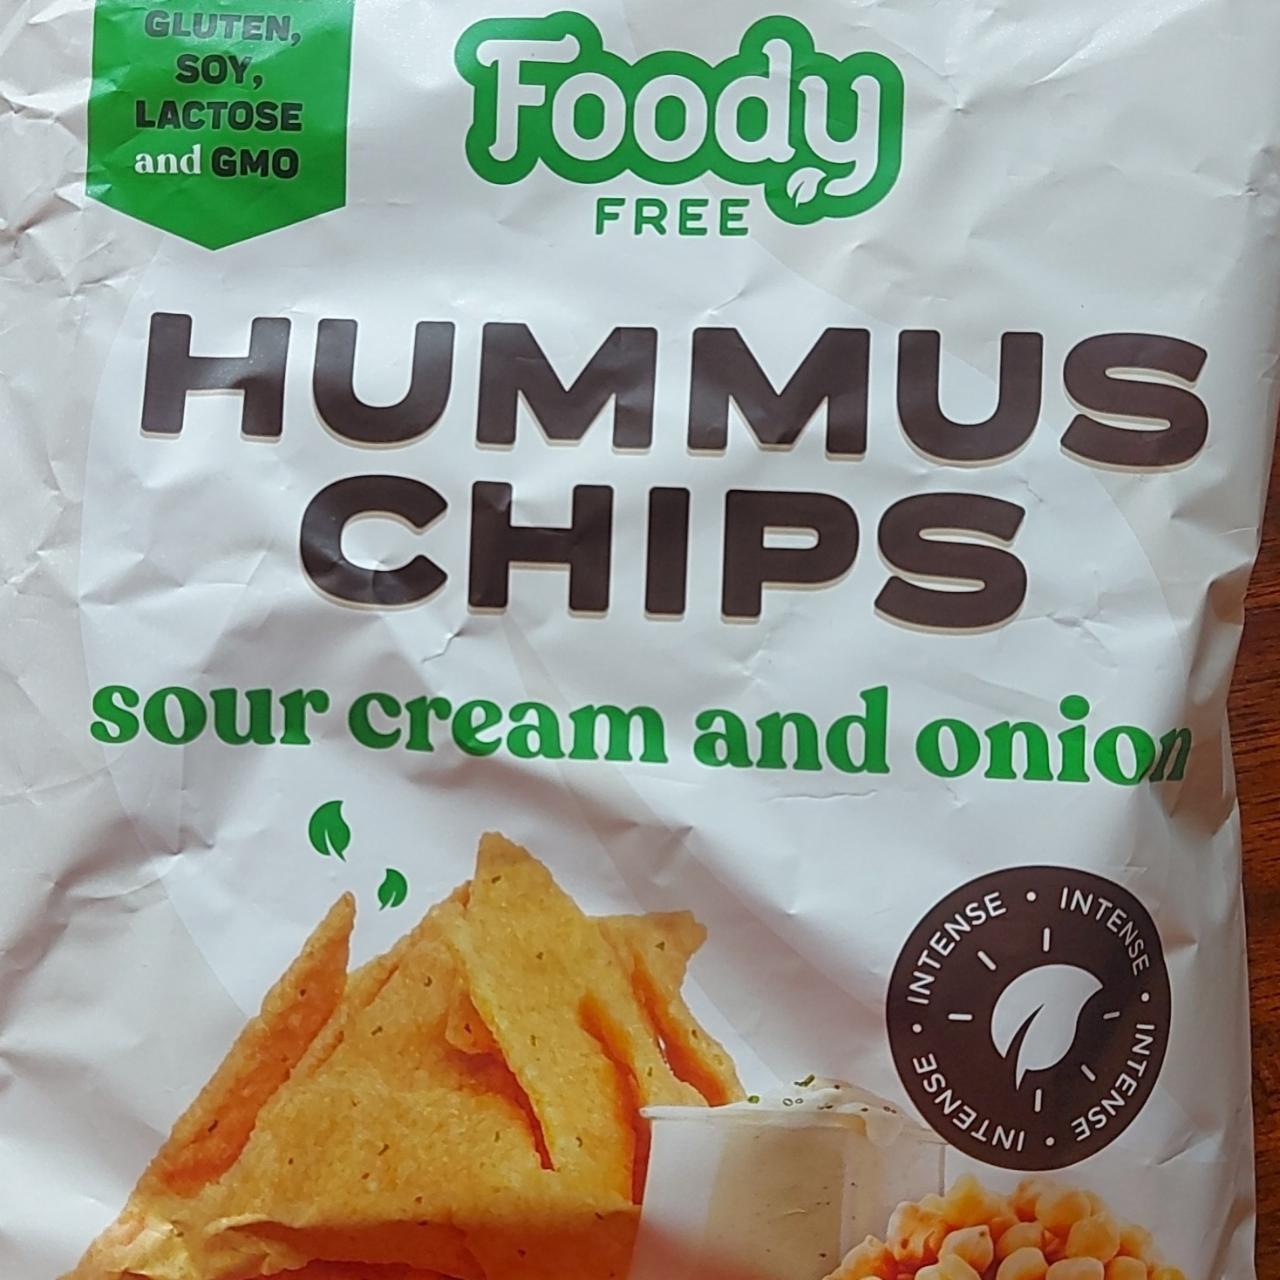 Képek - Hummus chips Sour cream and onion Foody Free